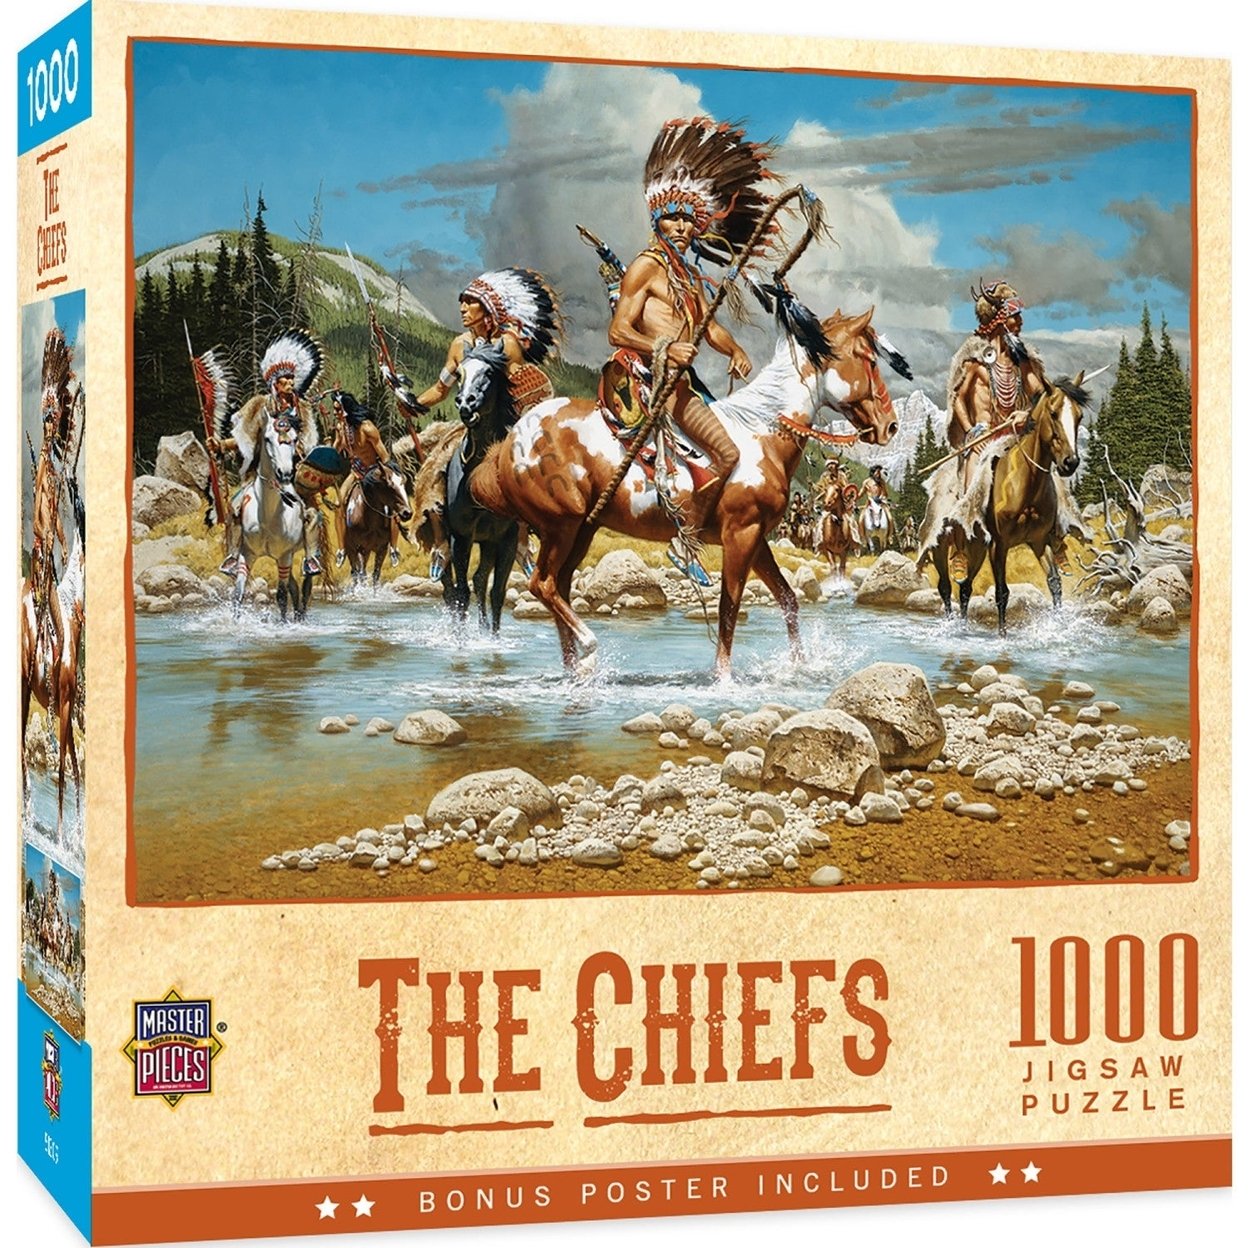 MasterPieces The Chiefs 1000 Piece Jigsaw Puzzle